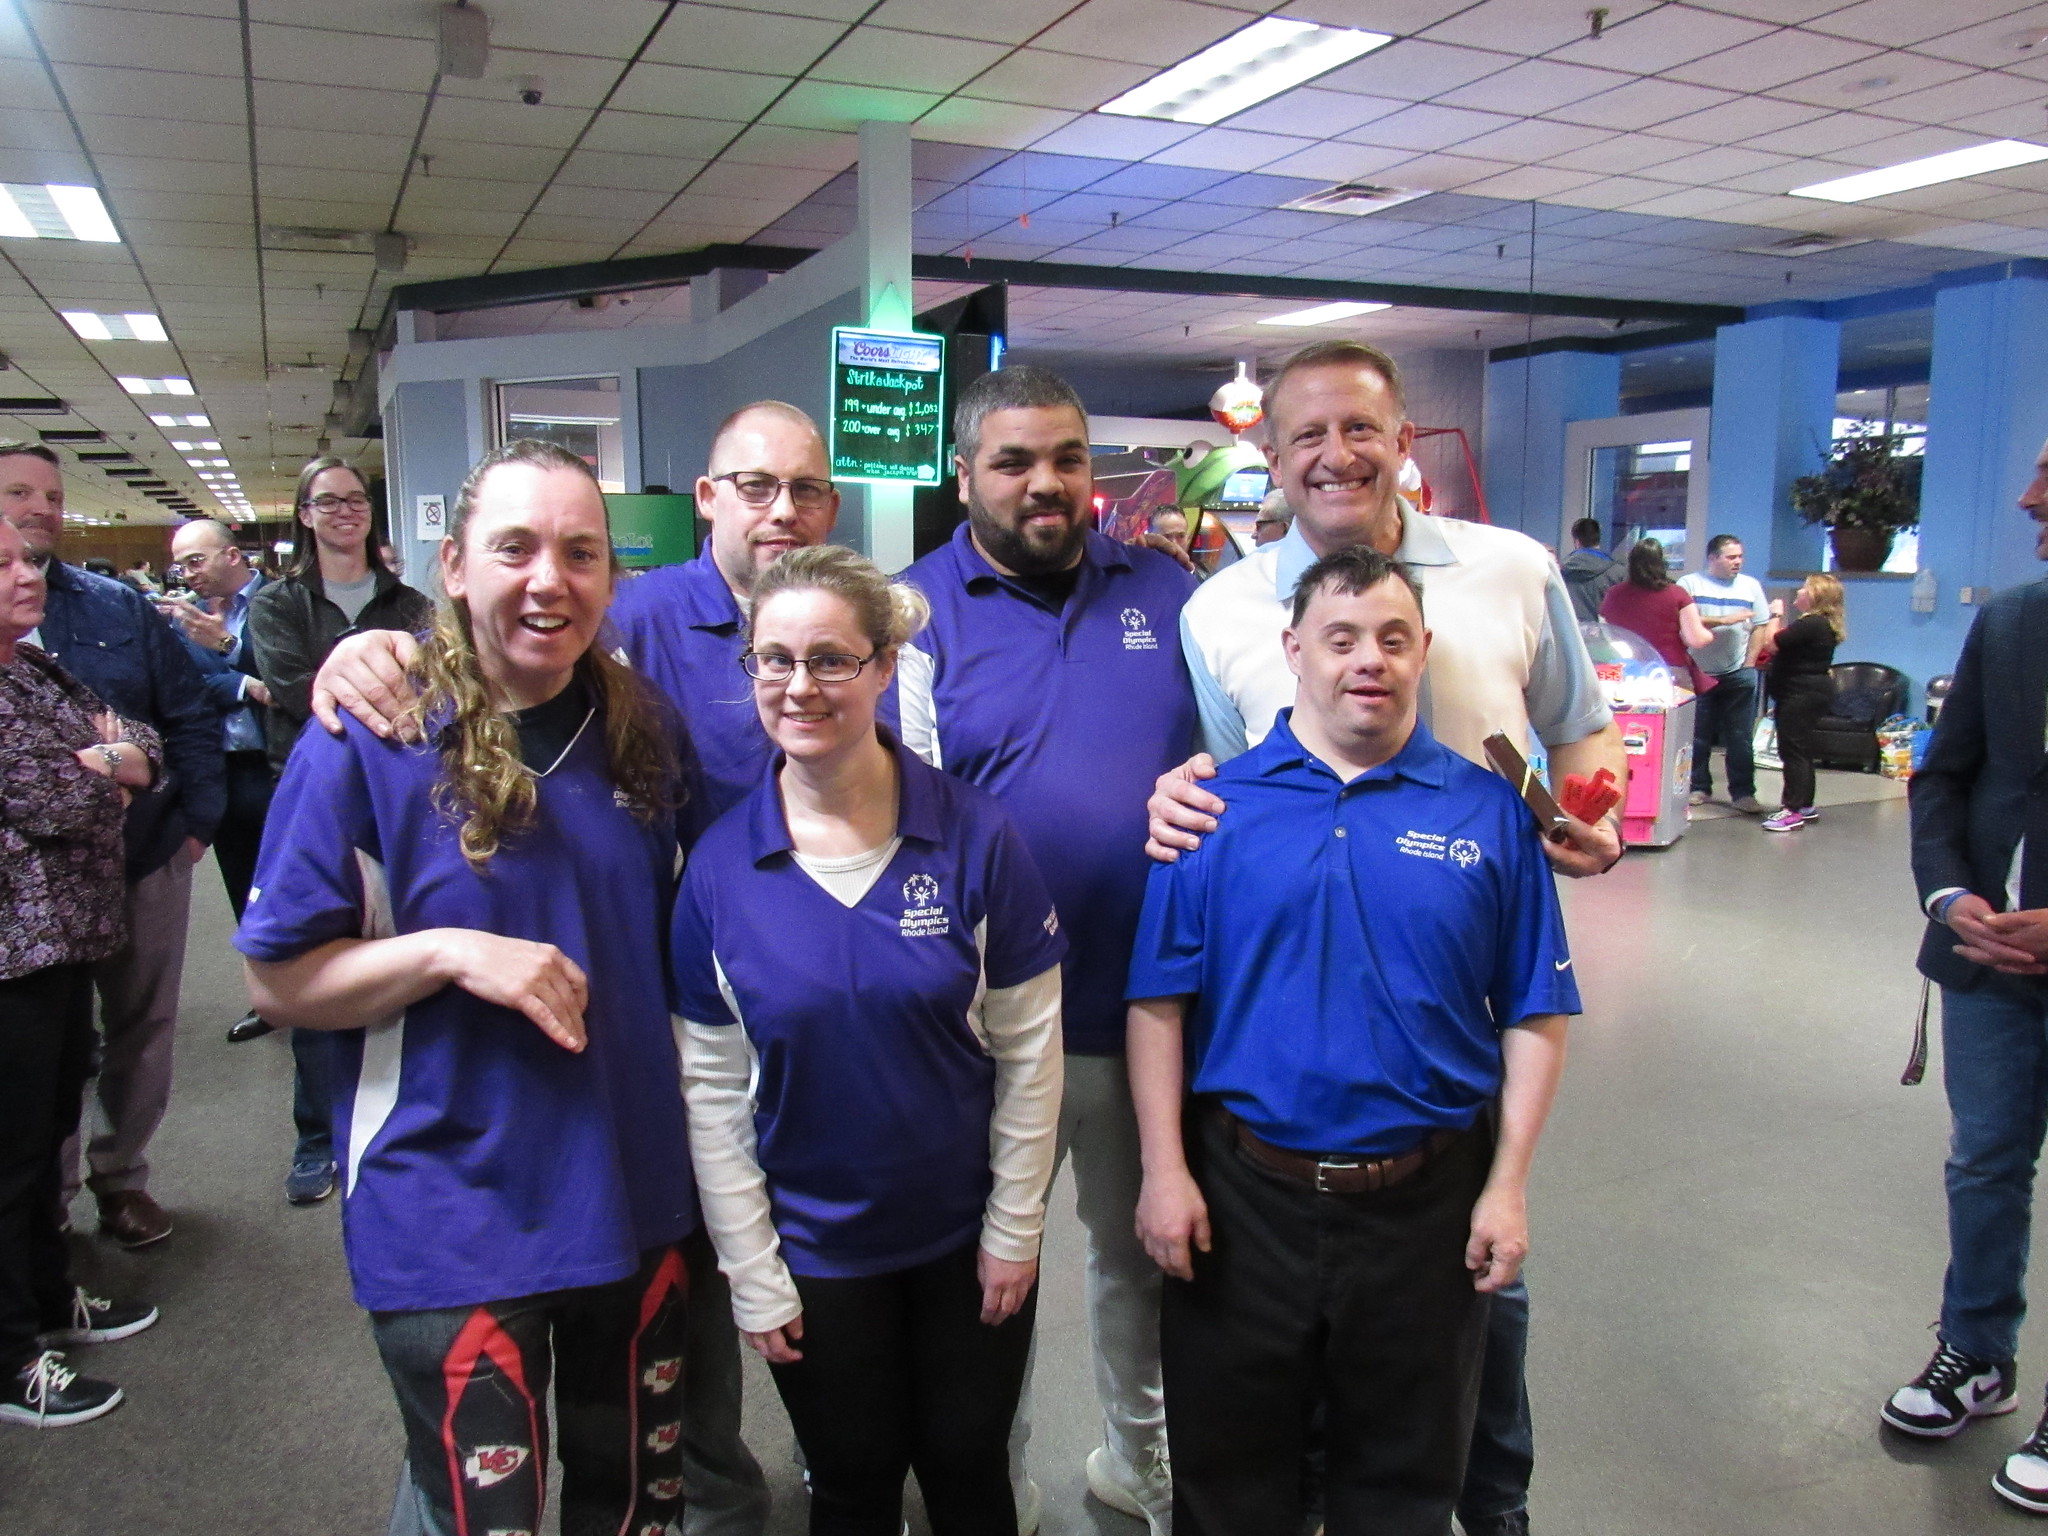 attendees at bowling community event posing for picture